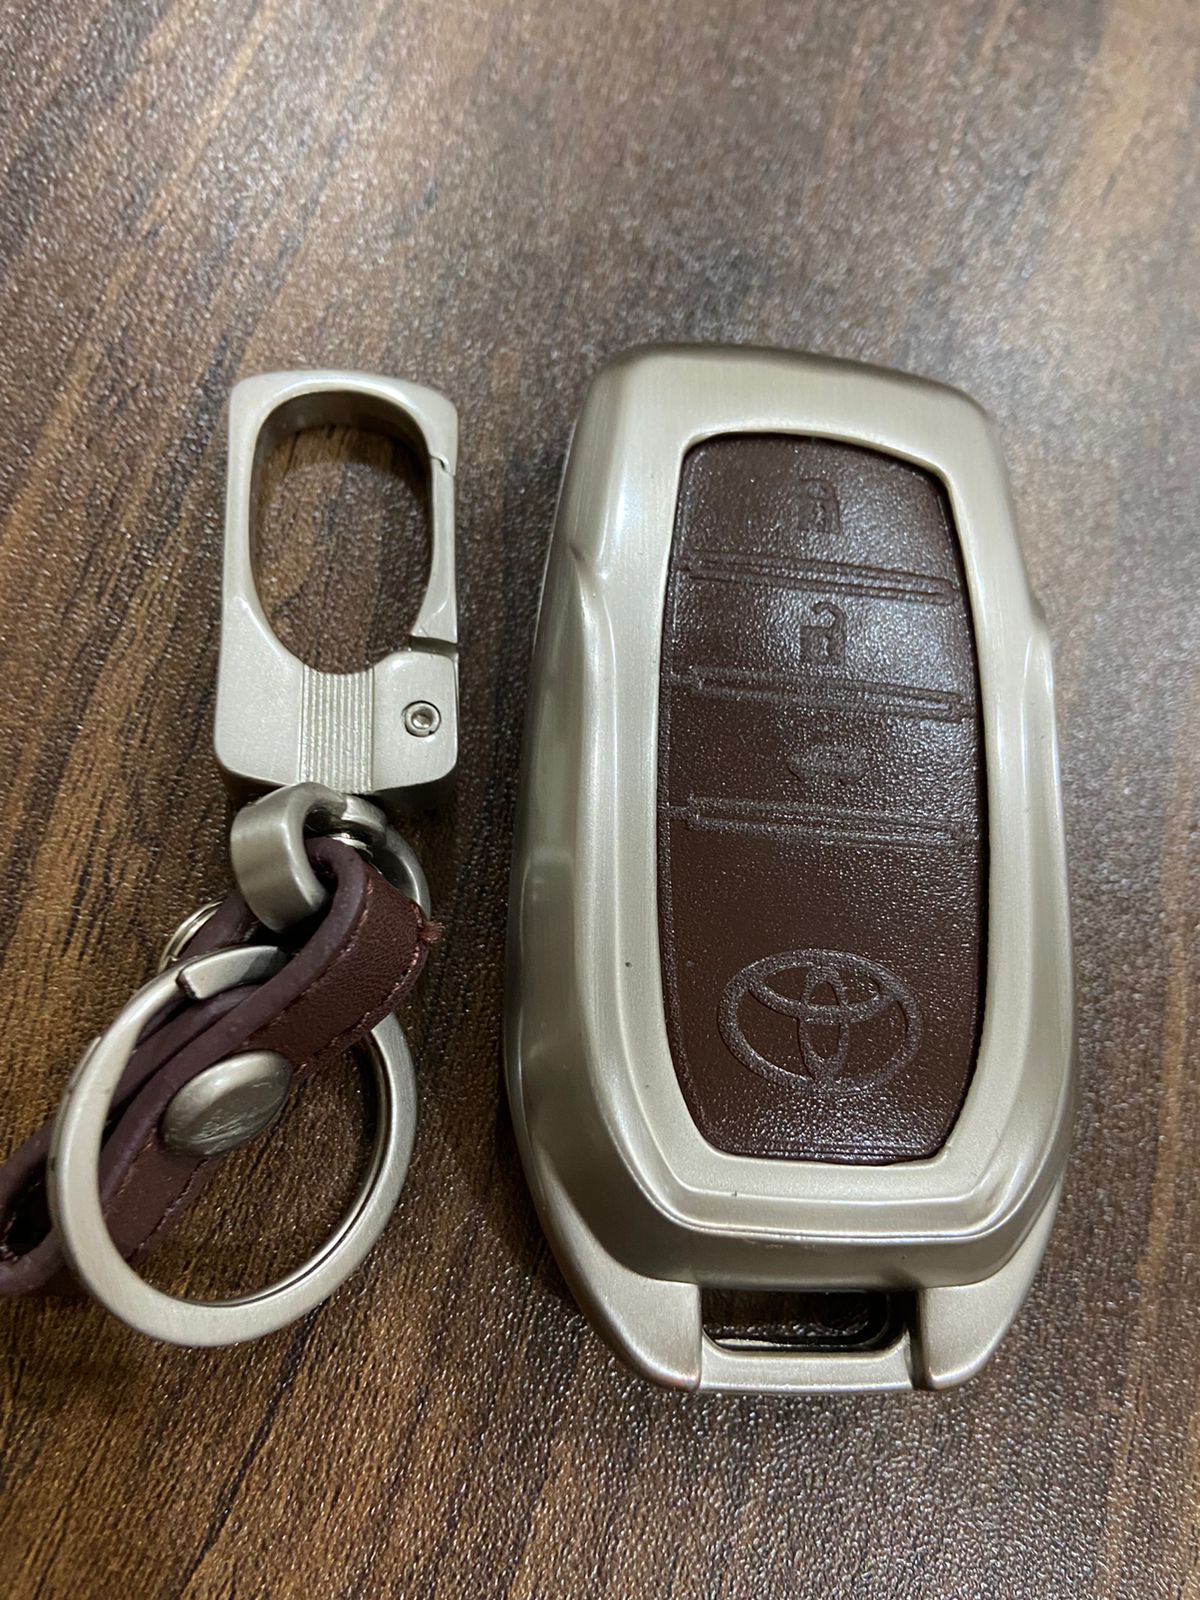 Car Remote Key Cover Zinc Alloy, Chrome and Leather for Toyota New Fortuner in Brown Color